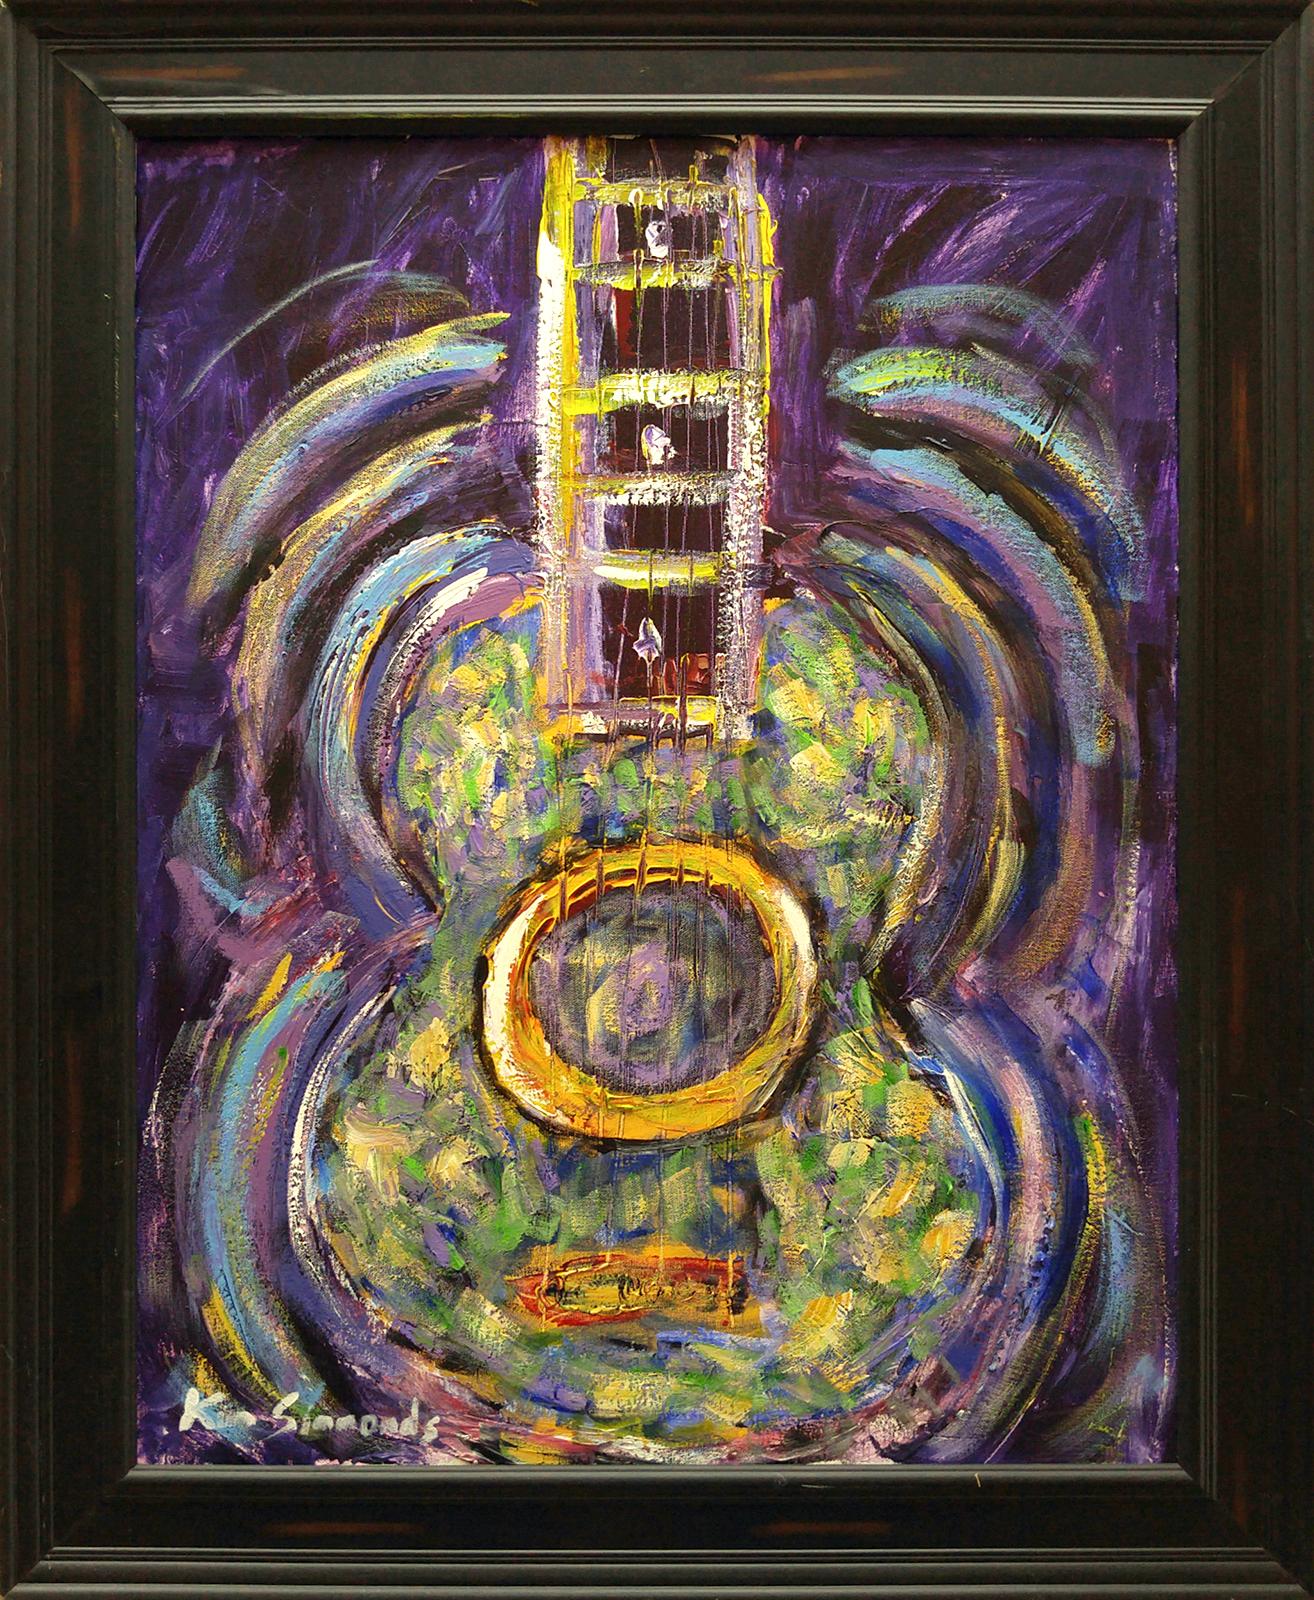 Space Guitar in violet and green, 33x27 framed, acrylic on canvas